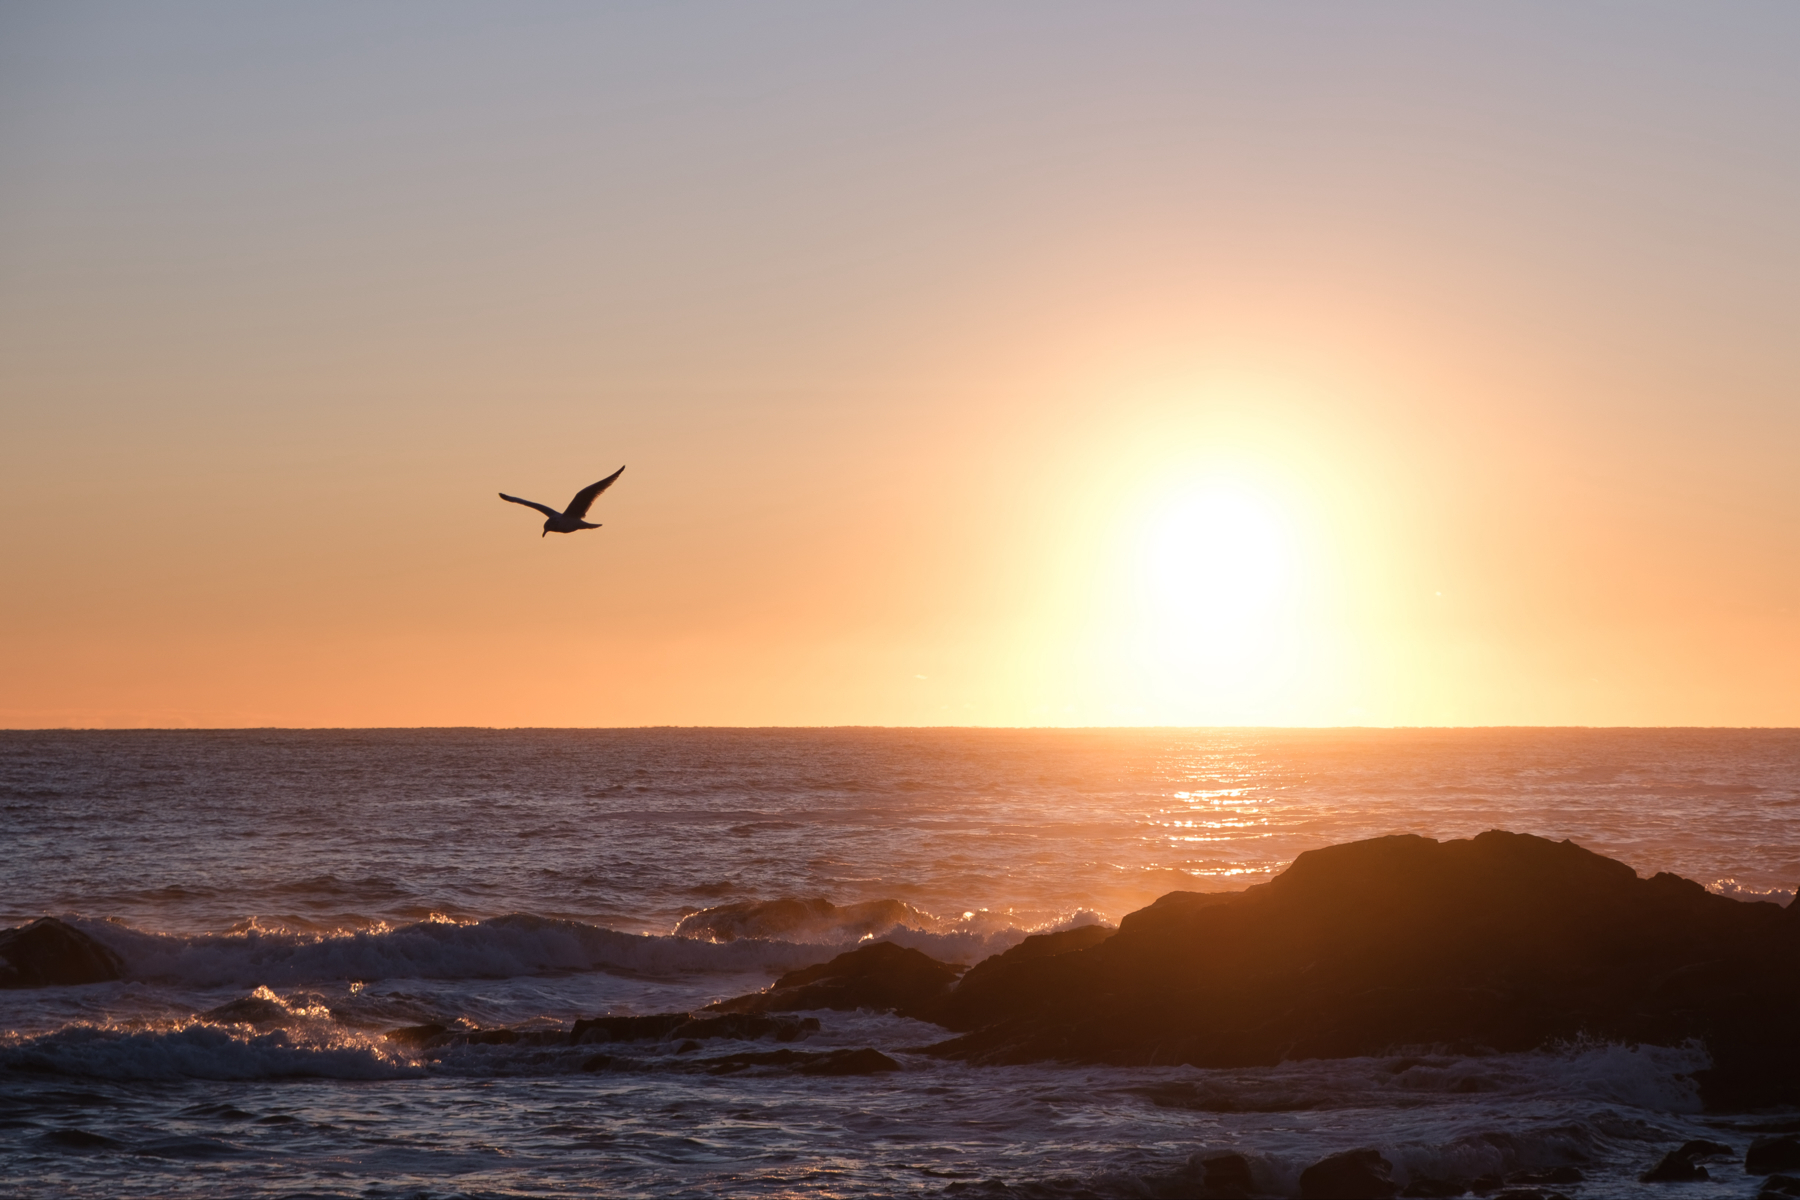 Seagull flying over the sea at sunrise with rocks in the foreground and the sun low on the horizon.